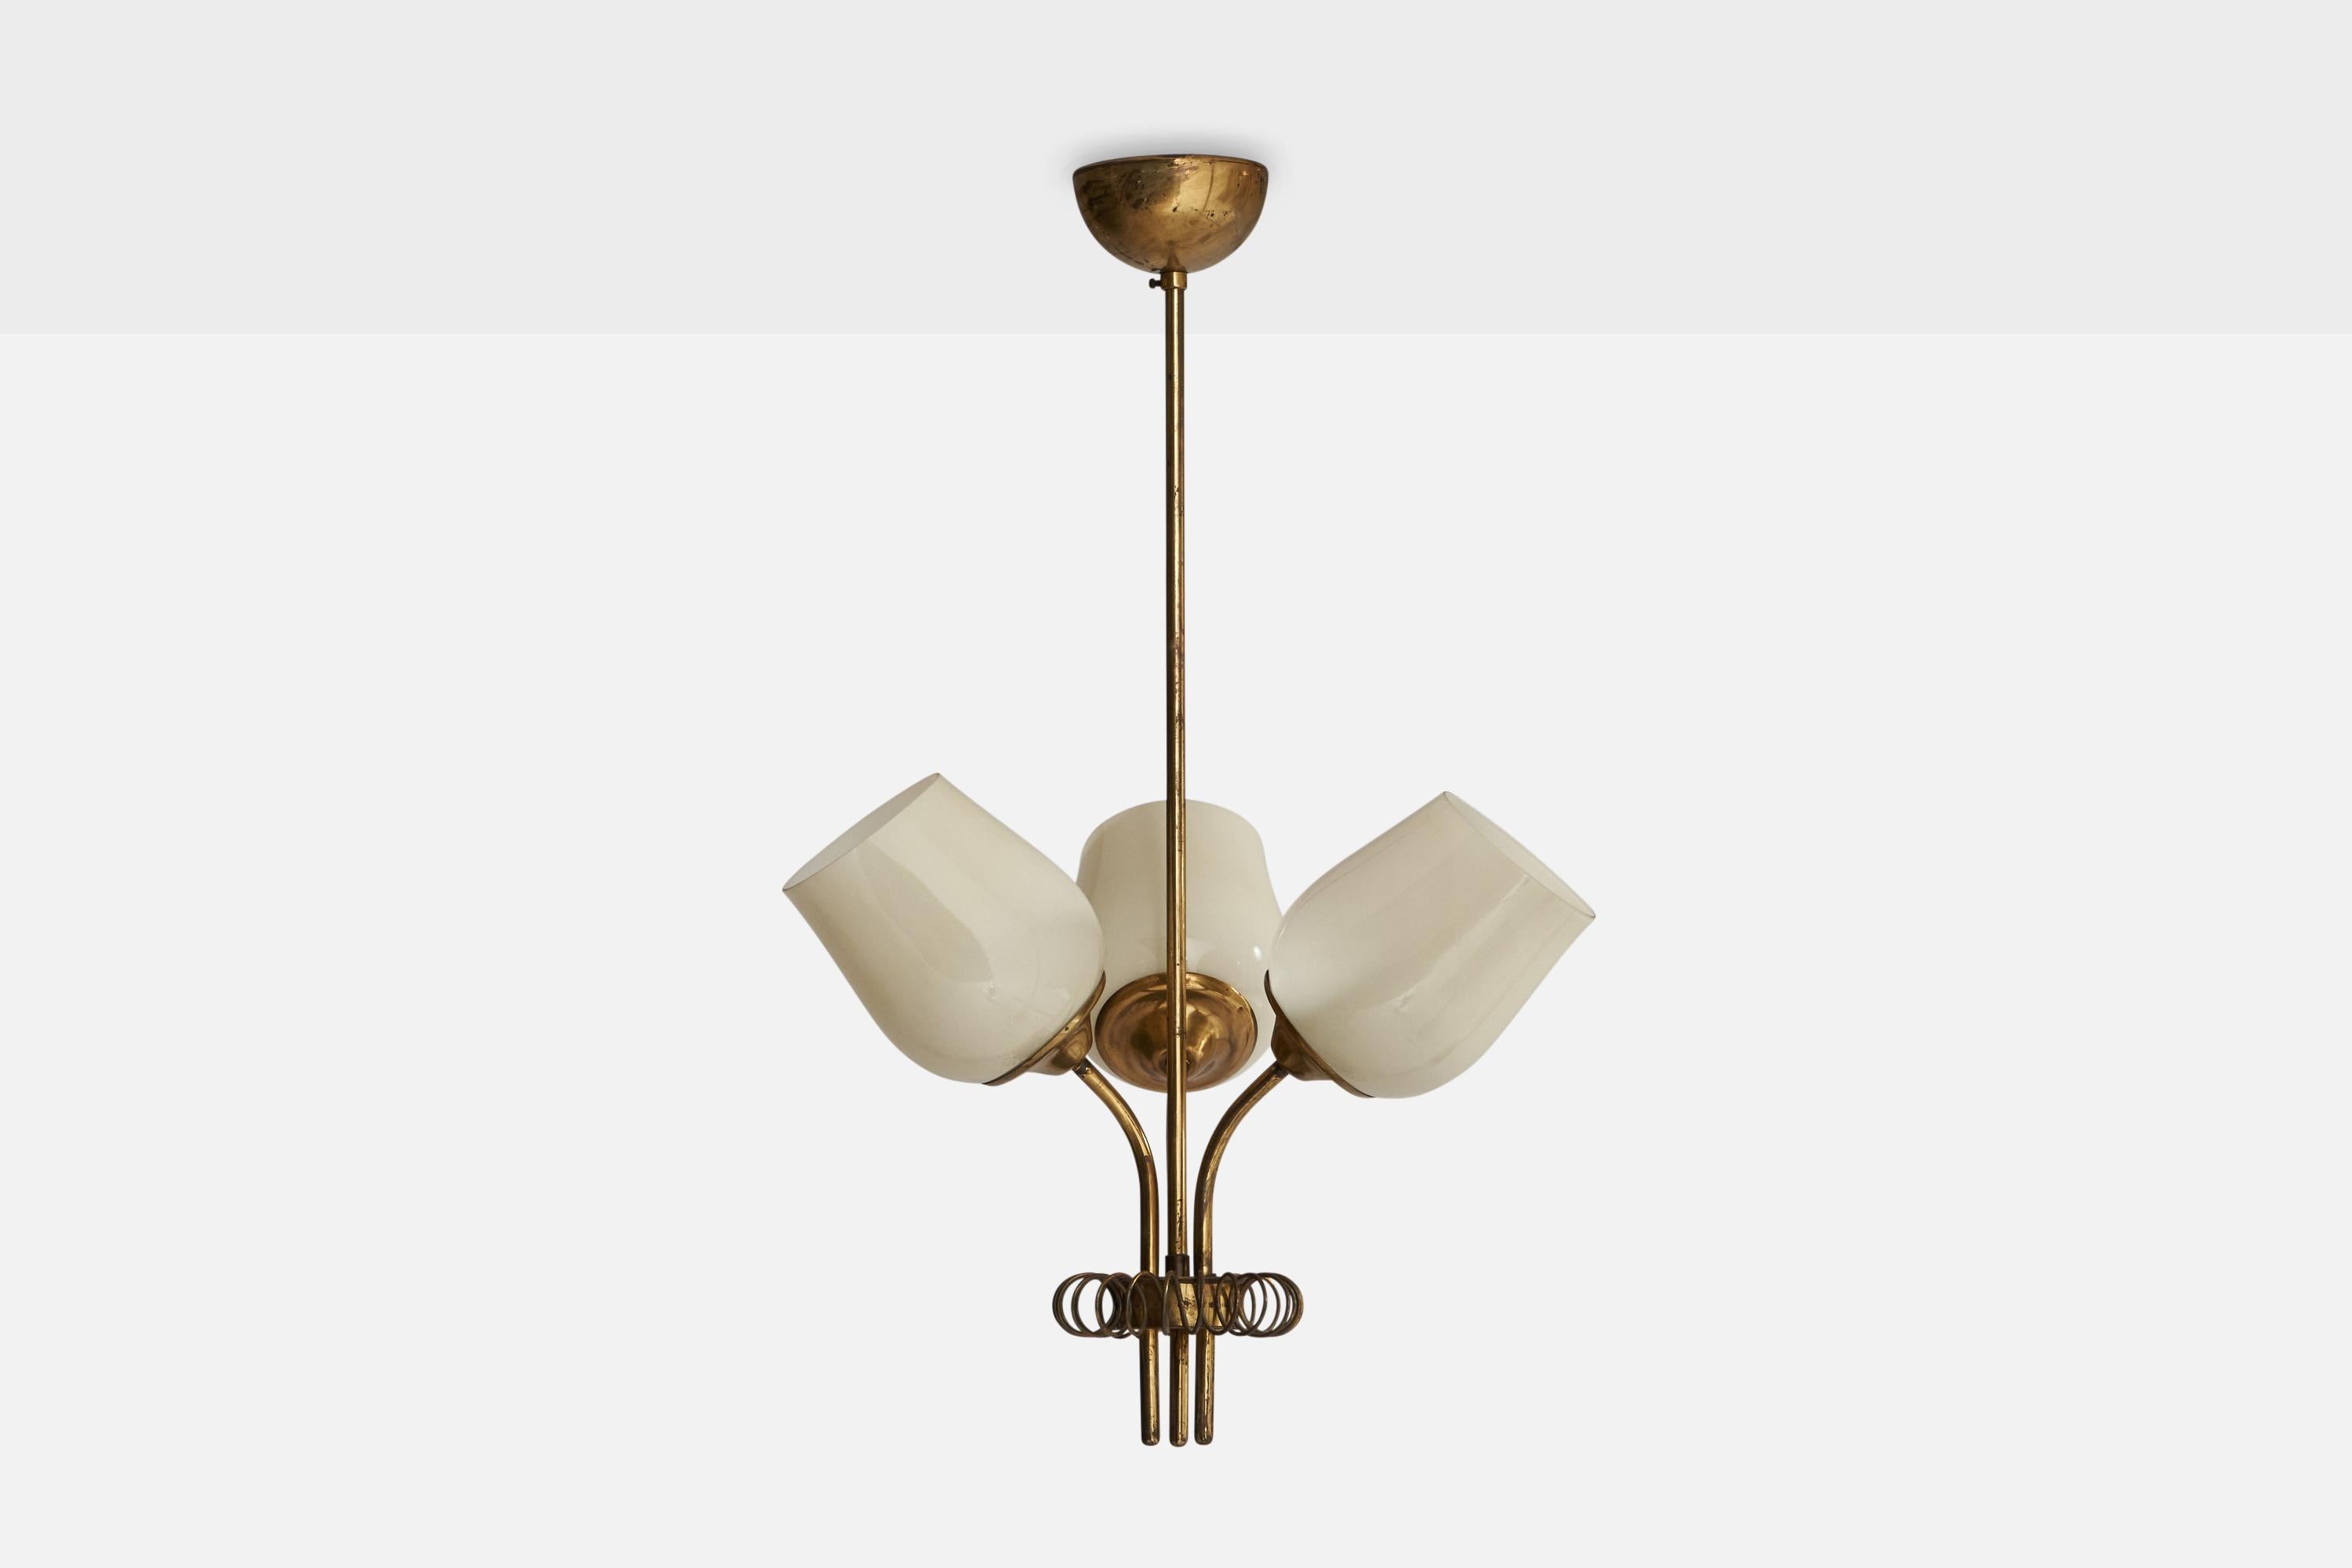 A brass and glass chandelier designed and produced in Finland, 1940s.

Dimensions of canopy (inches): 2.28” H x 4” Diameter
Socket takes standard E-26 bulbs. 3 sockets.There is no maximum wattage stated on the fixture. All lighting will be converted